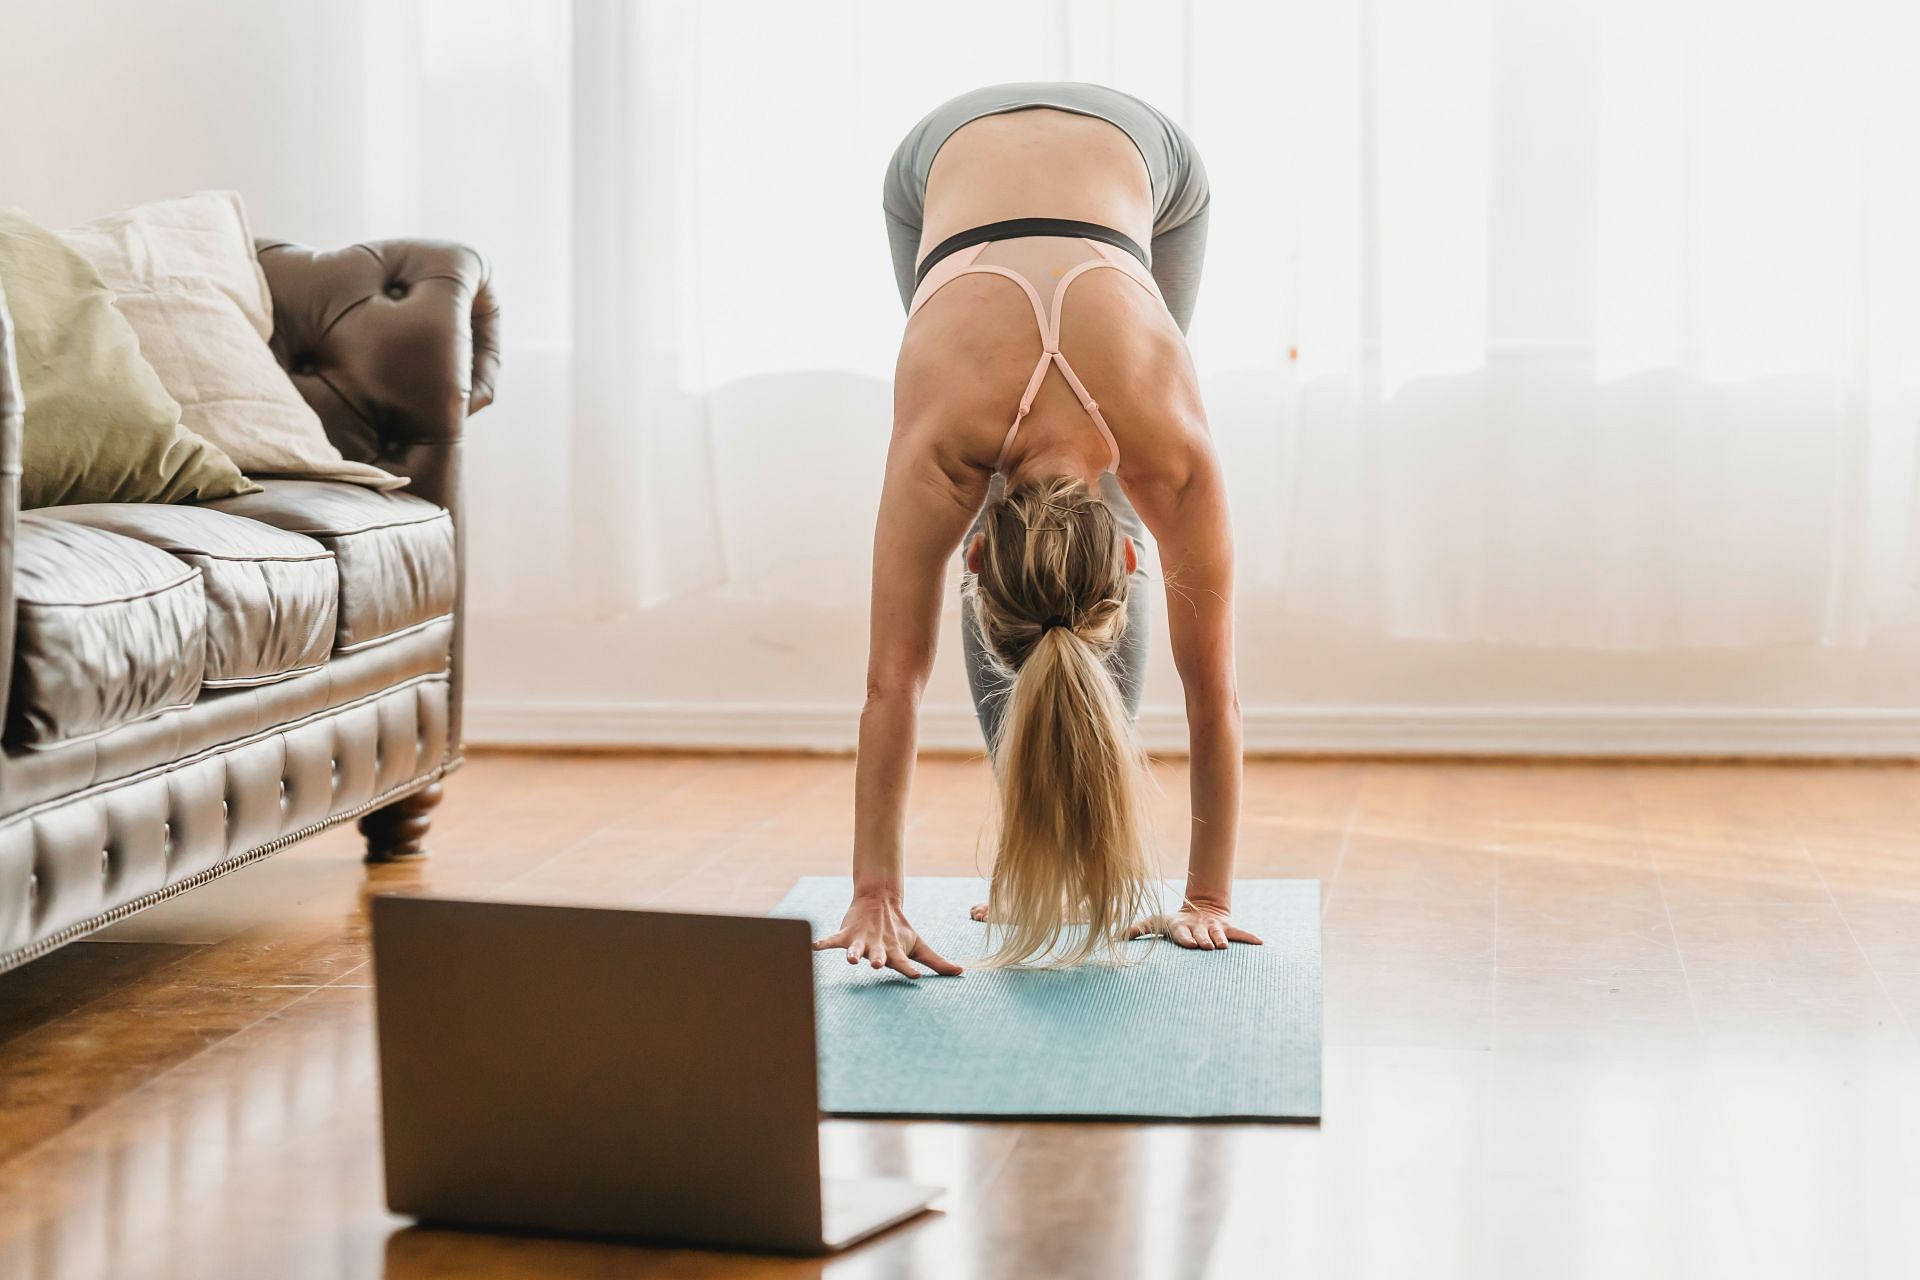 Uttanasana is one of the simplest yoga poses you can do to de-stress (Image via Pexels/Marta Wave)